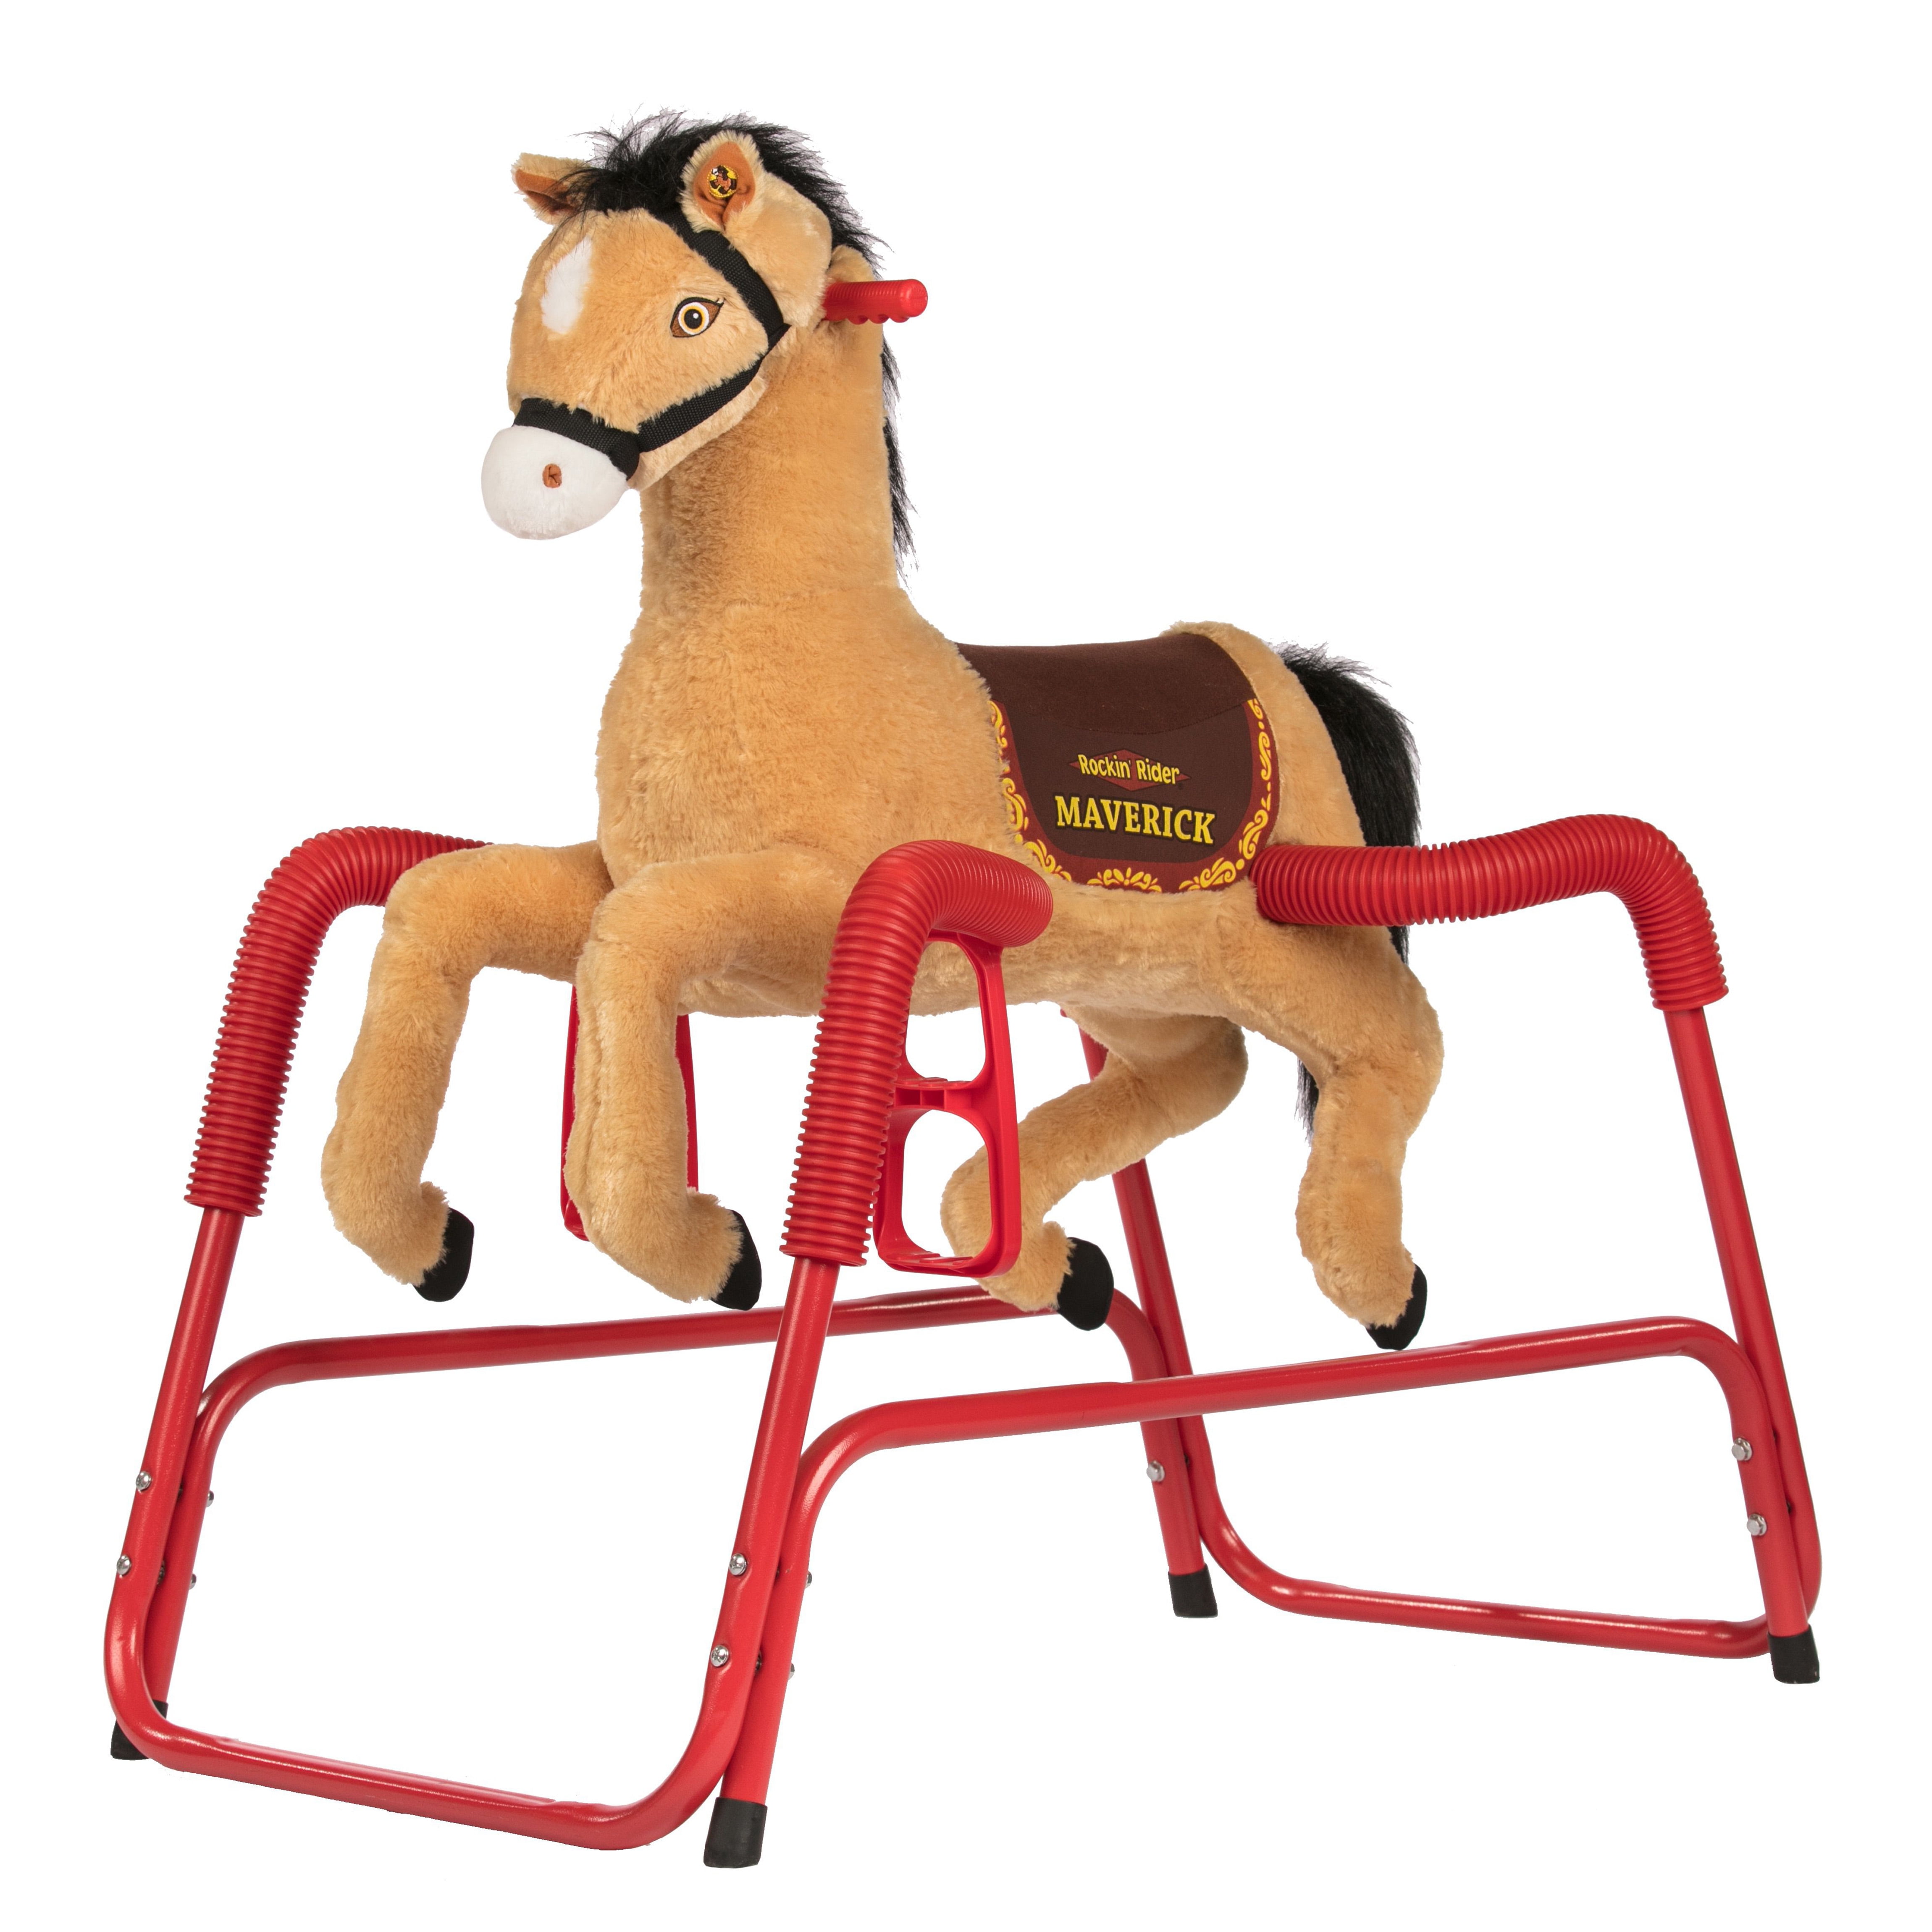 Qaba Kids Plush Toy Spring Horse-Style Rodeo Bull Ride-On Toy with Realistic Sou 